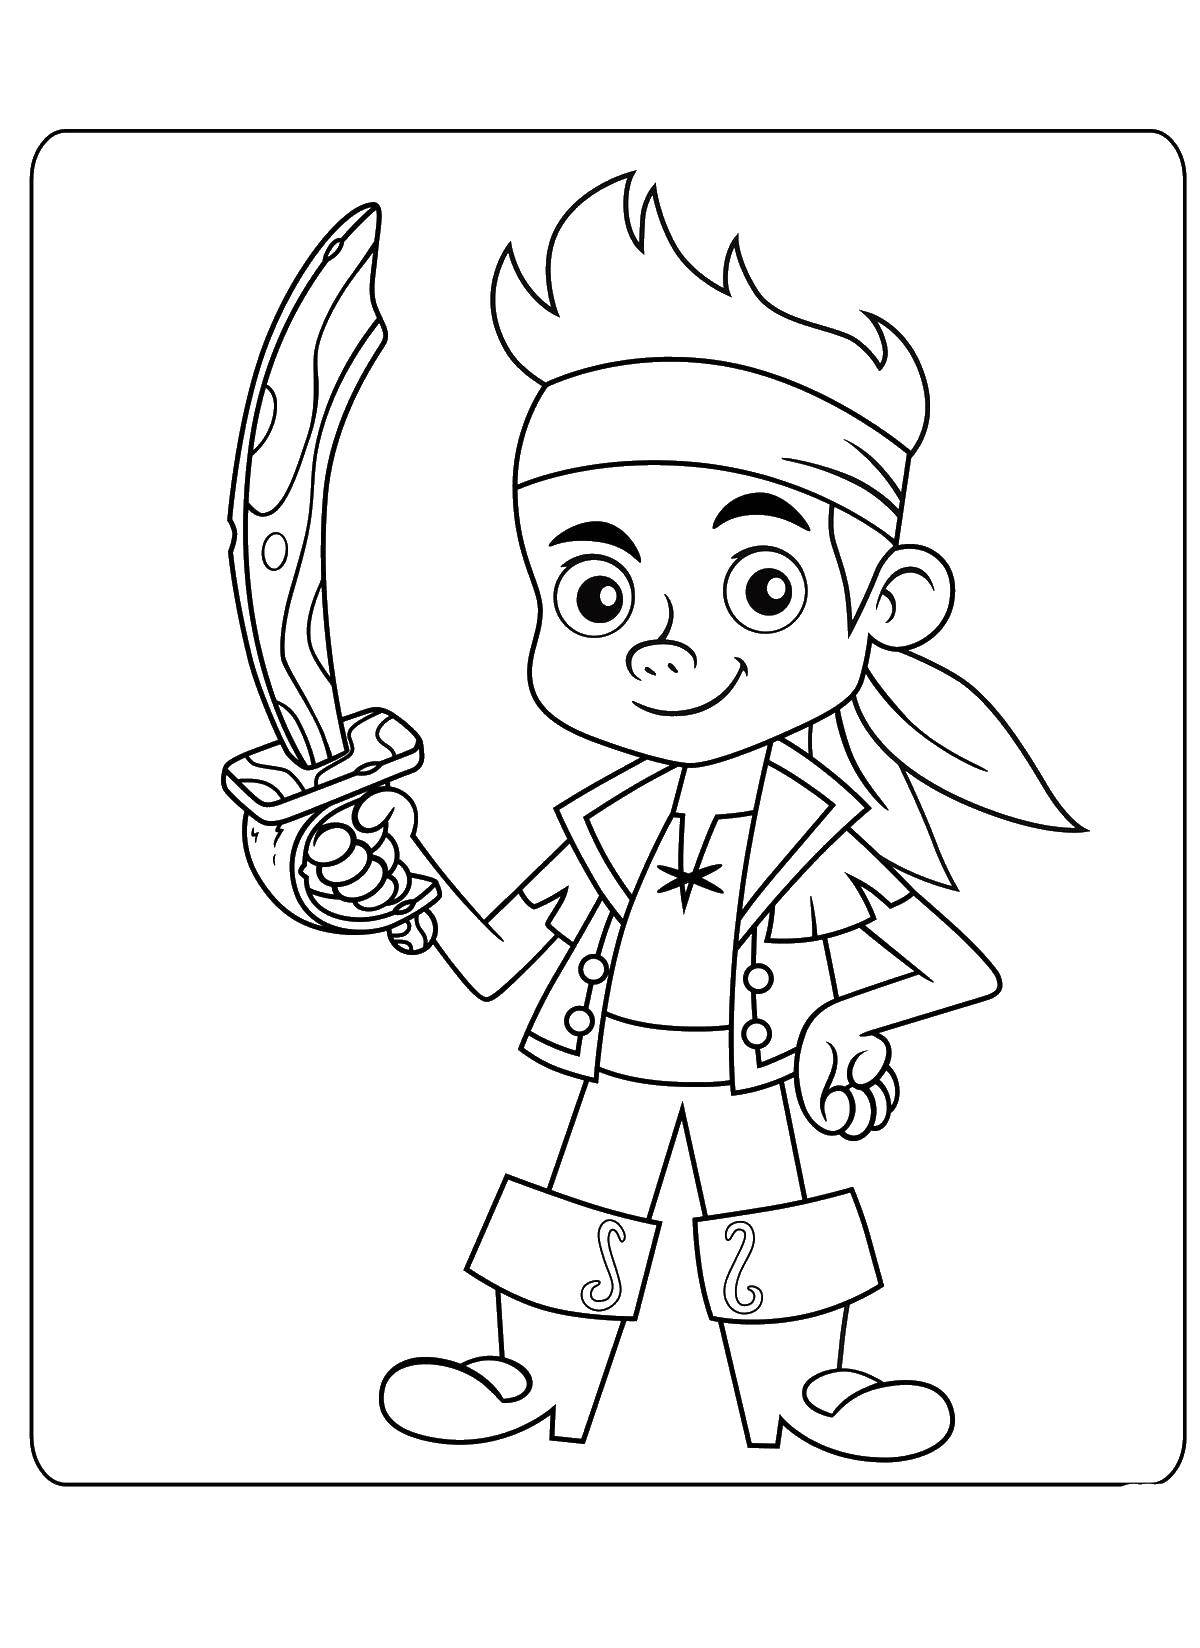 Coloring Pirate Jake. Category the pirates. Tags:  pirate Jake.